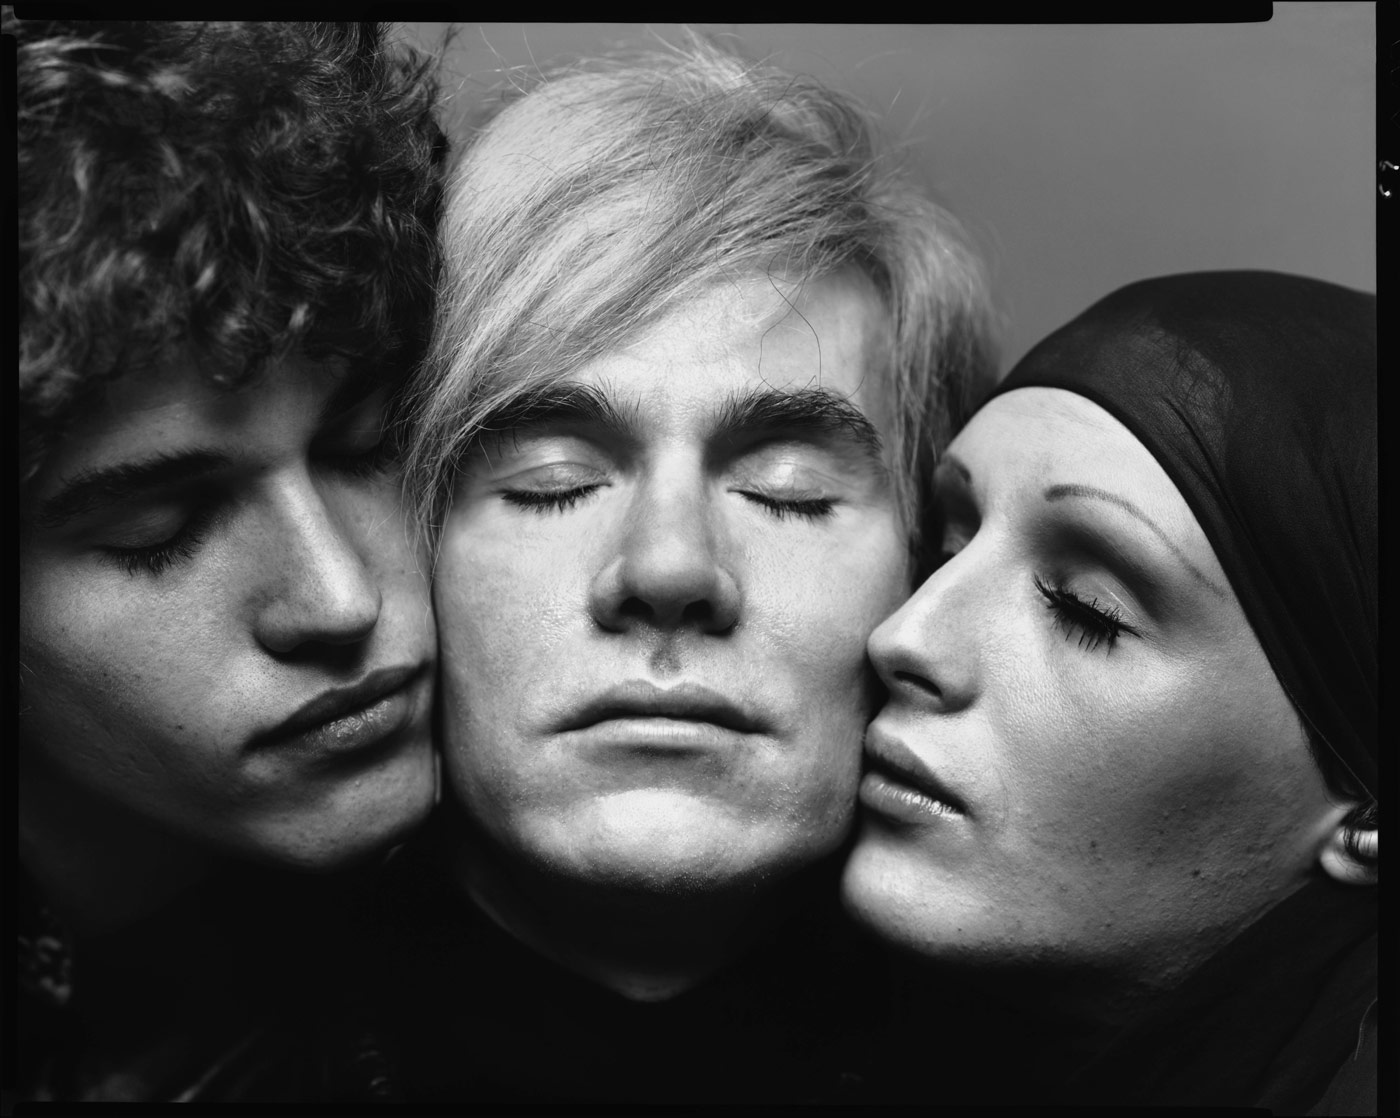 andy-warhol-artist-with-jay-johnson-and-candy-darling-actors-new-york-august-20-1969-web